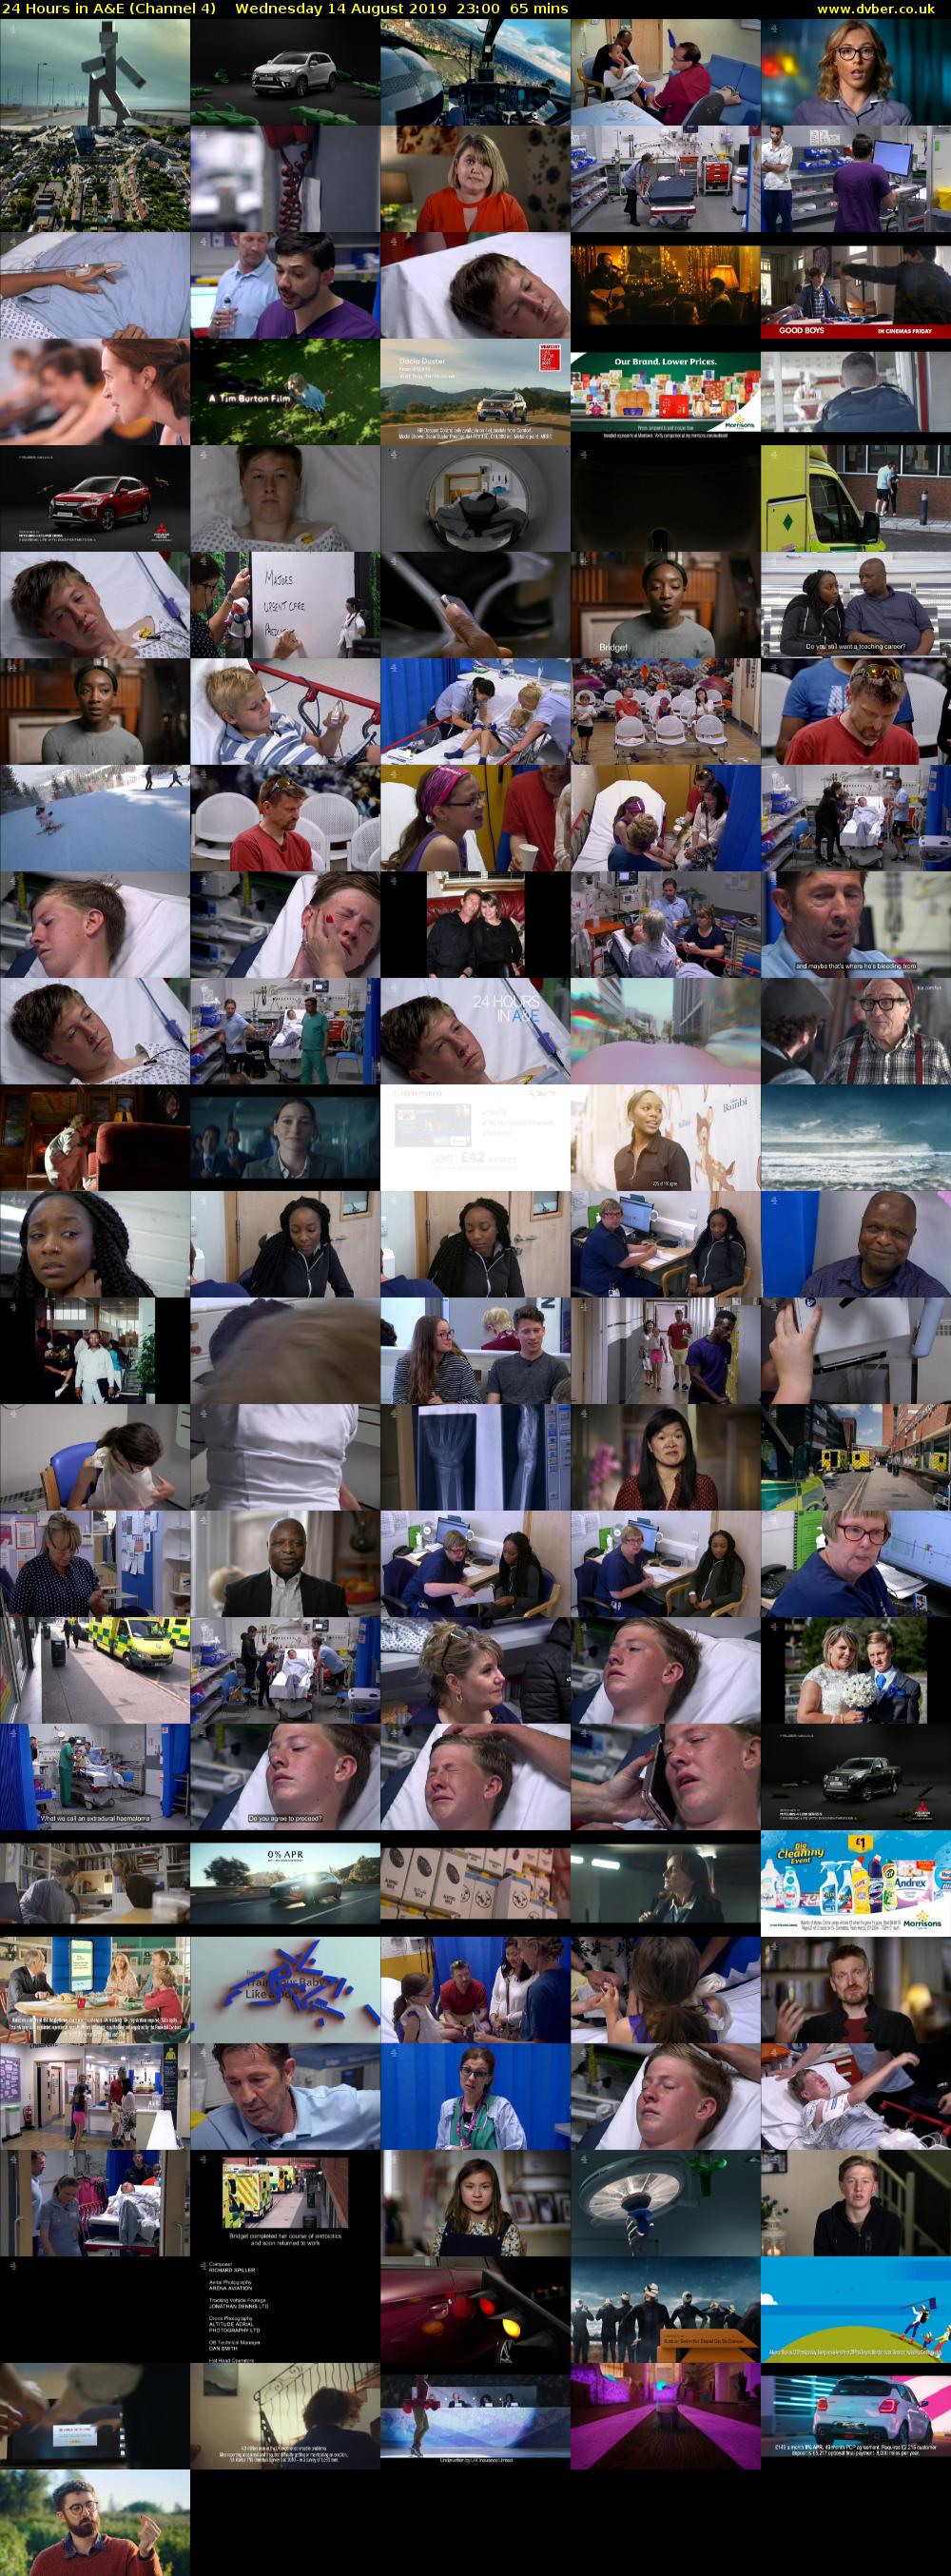 24 Hours in A&E (Channel 4) Wednesday 14 August 2019 23:00 - 00:05